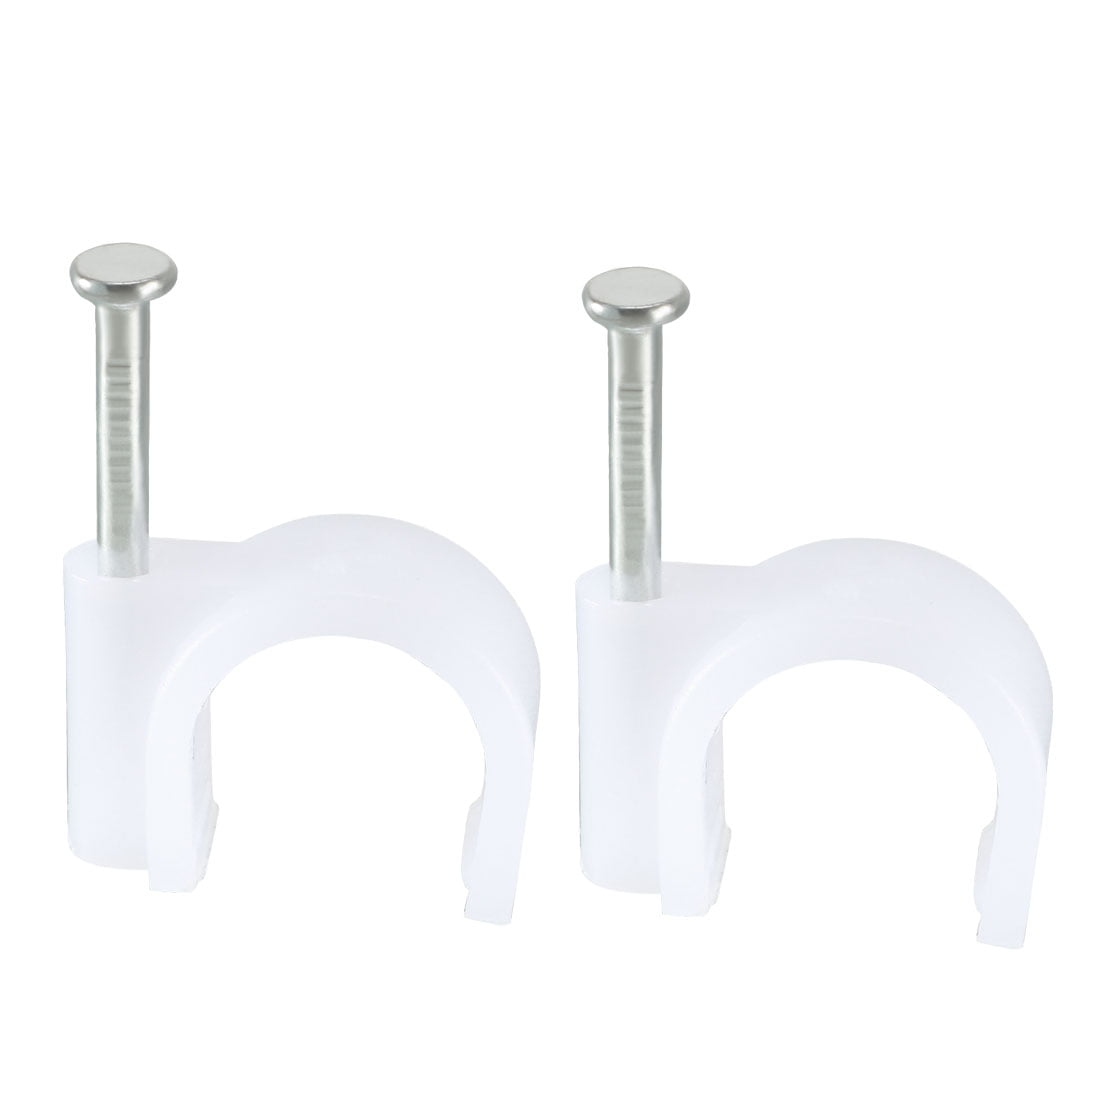 Large White Round Cable Nail Fixing Clips Clamps Electrical Leads 12,14,16mm 